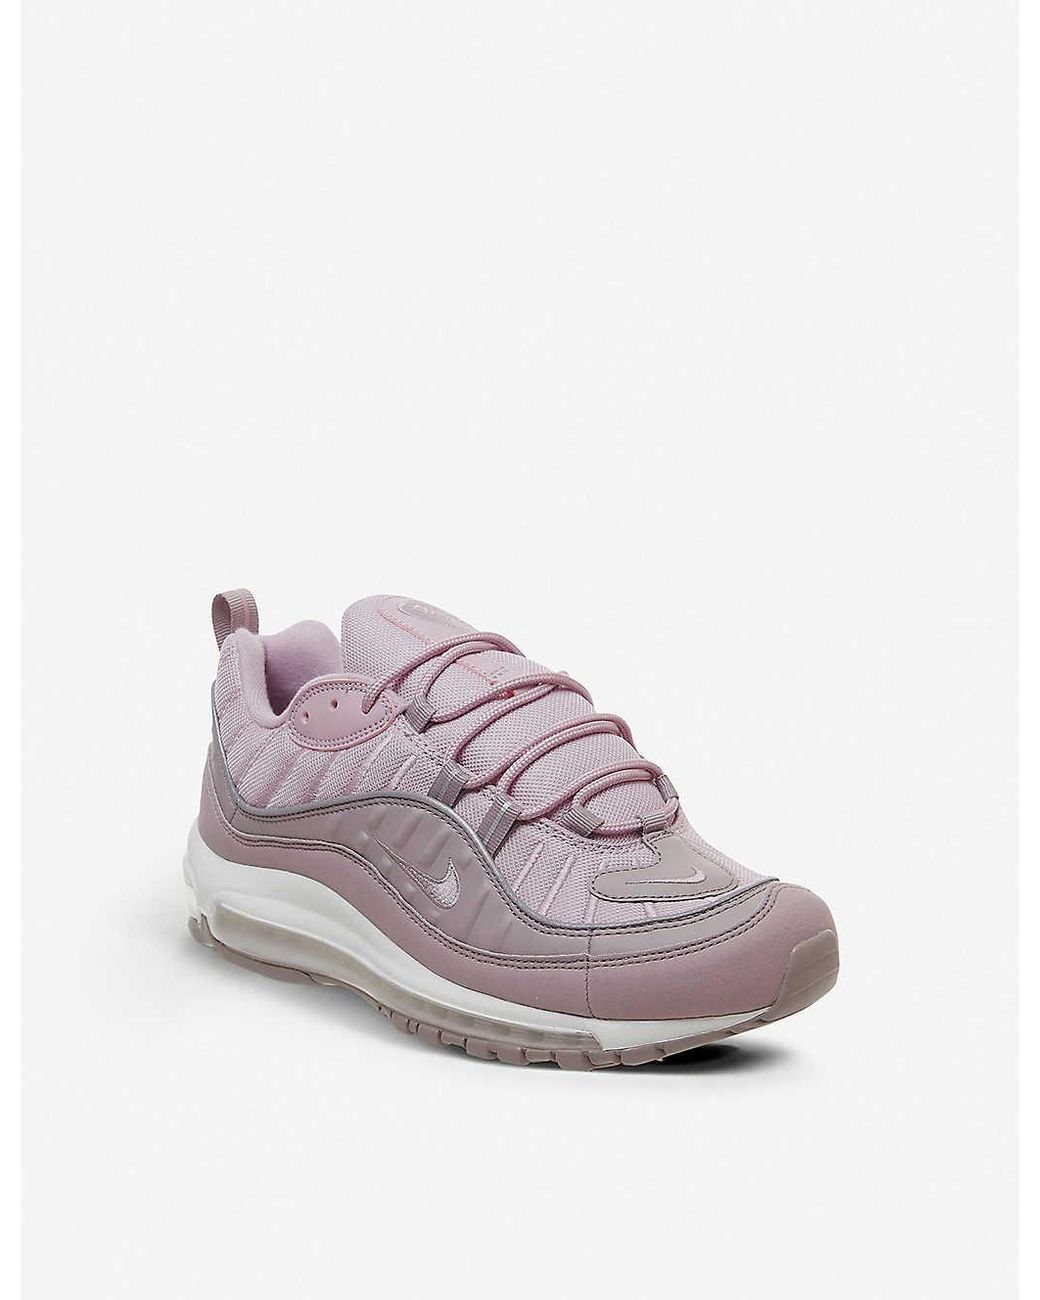 Nike Air Max 98 Leather Trainers in 